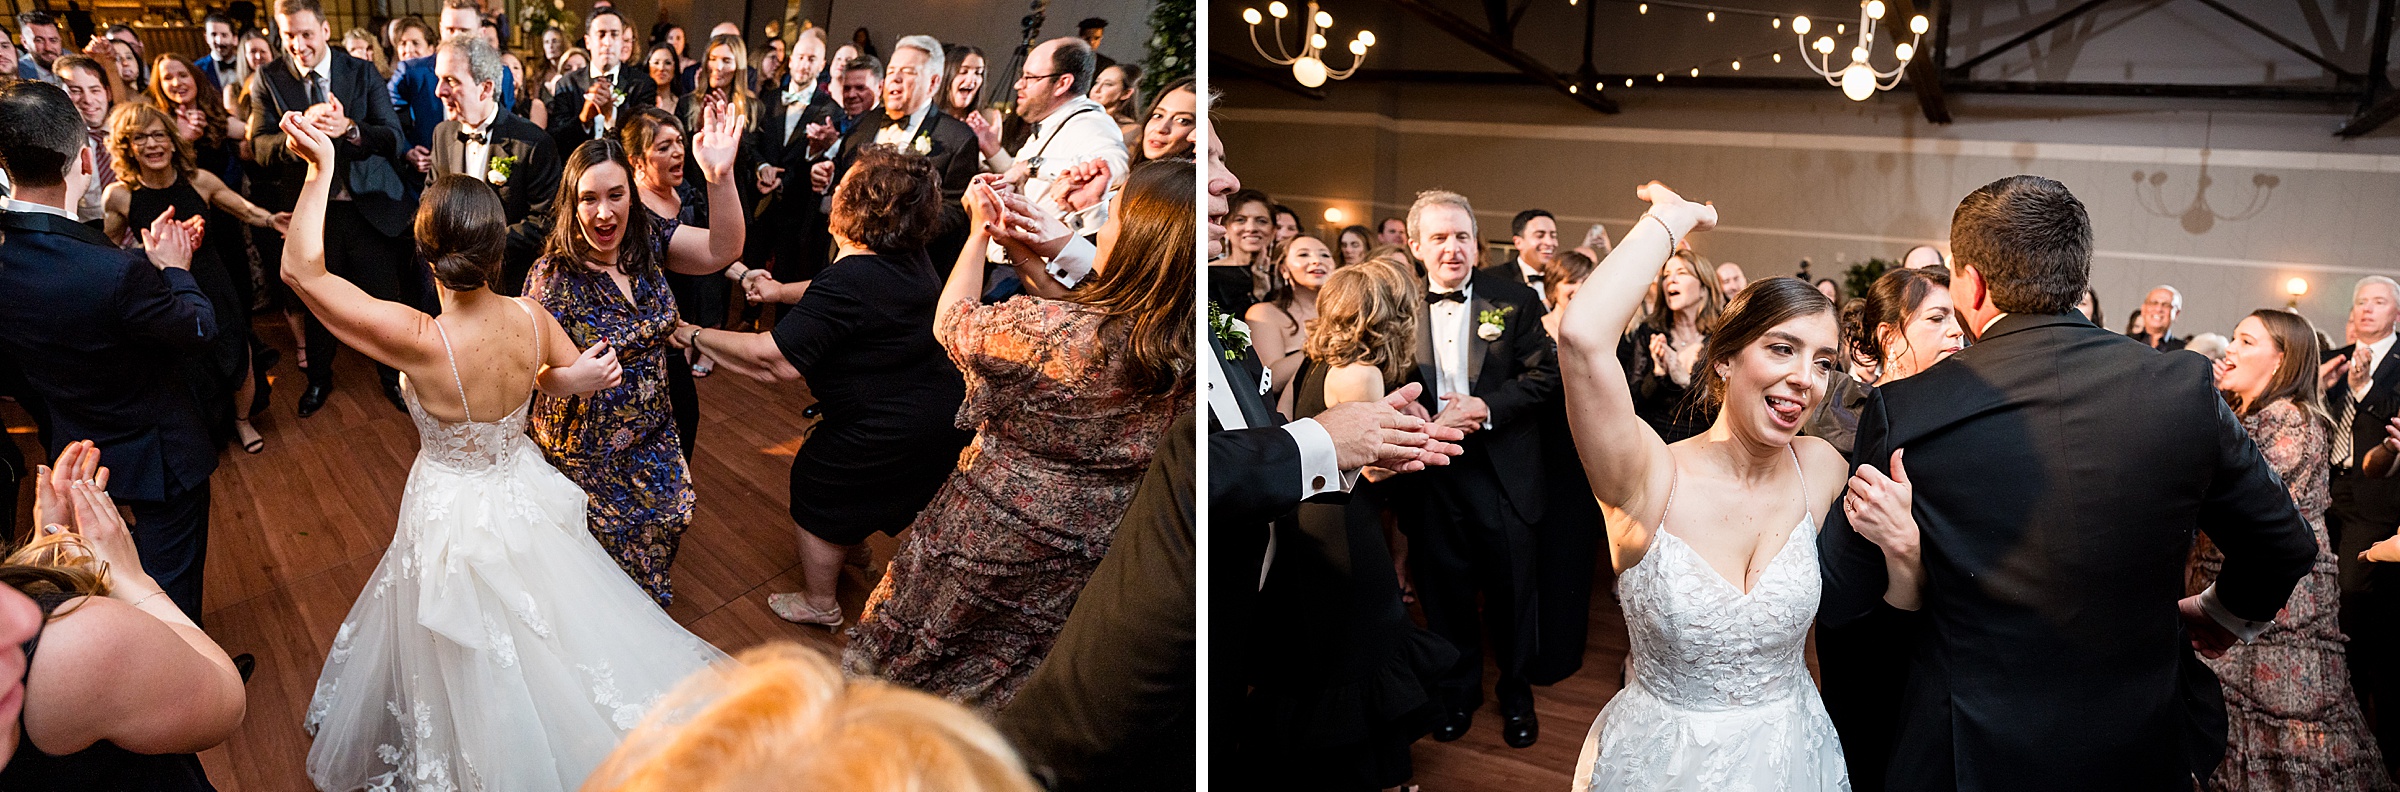 At a Lilah Events wedding, the bride and groom share a dance at the reception.